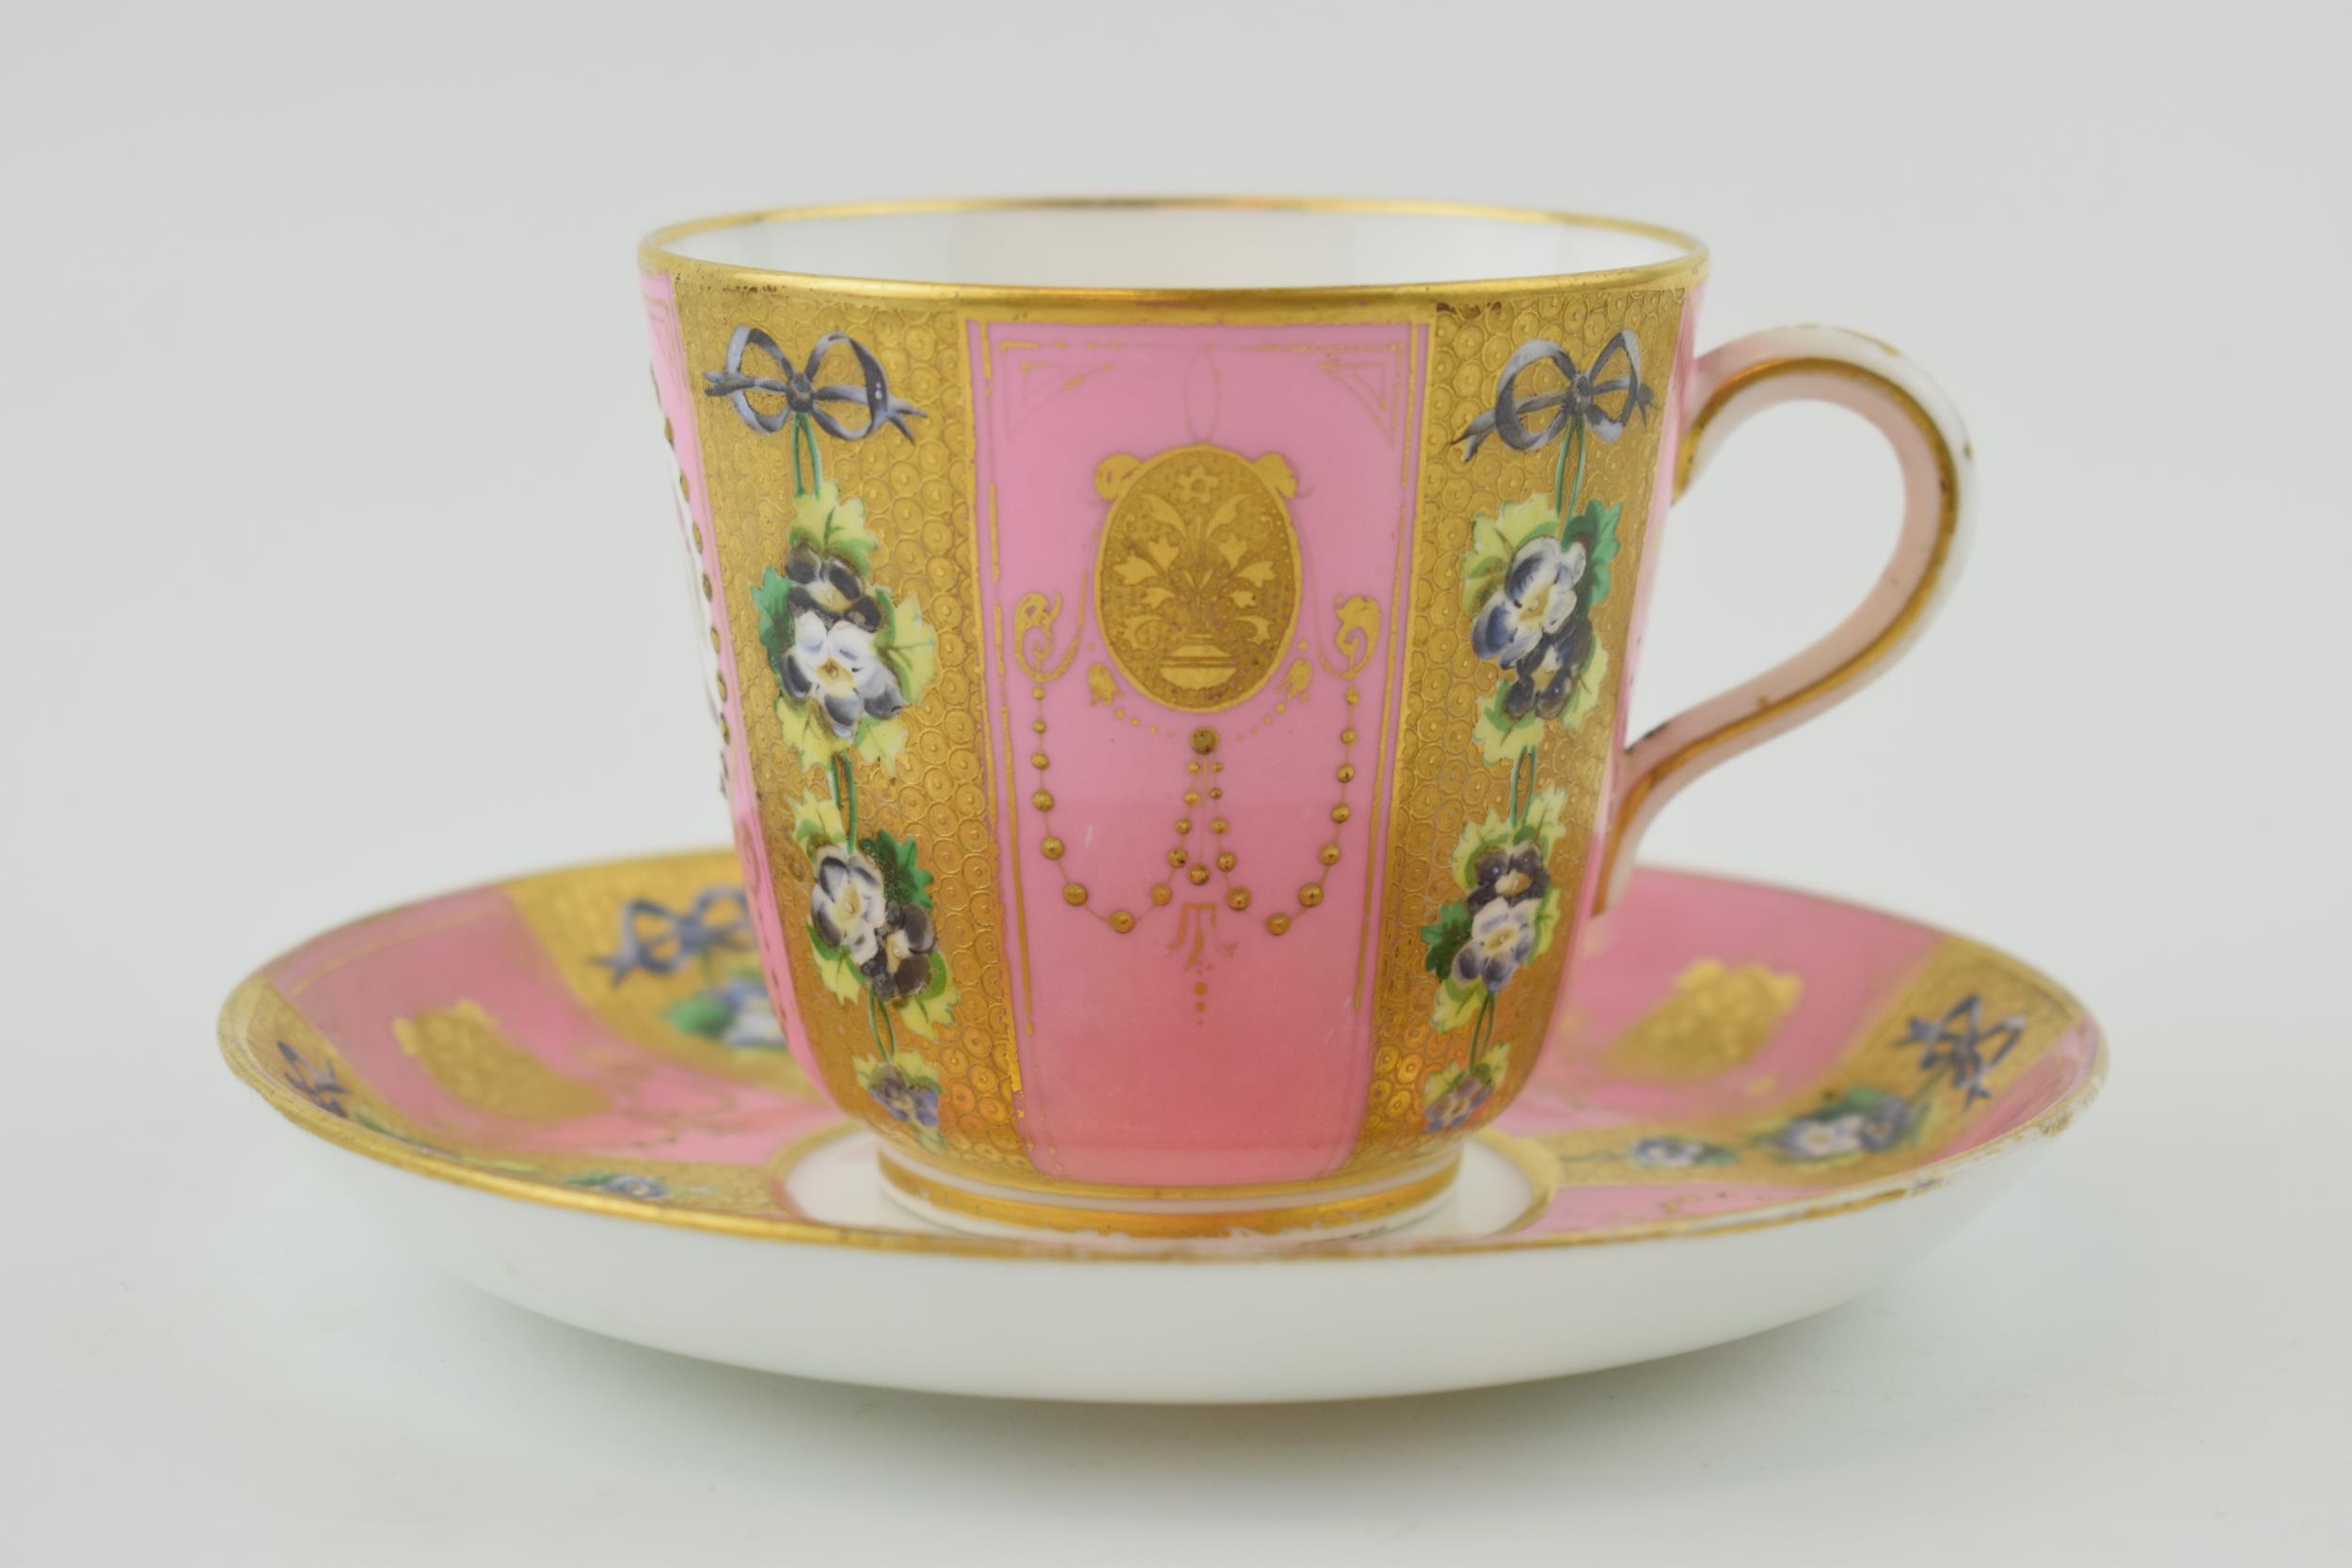 Victorian Minton cup and saucer with heavily gilded decoration, classical design, retailed by